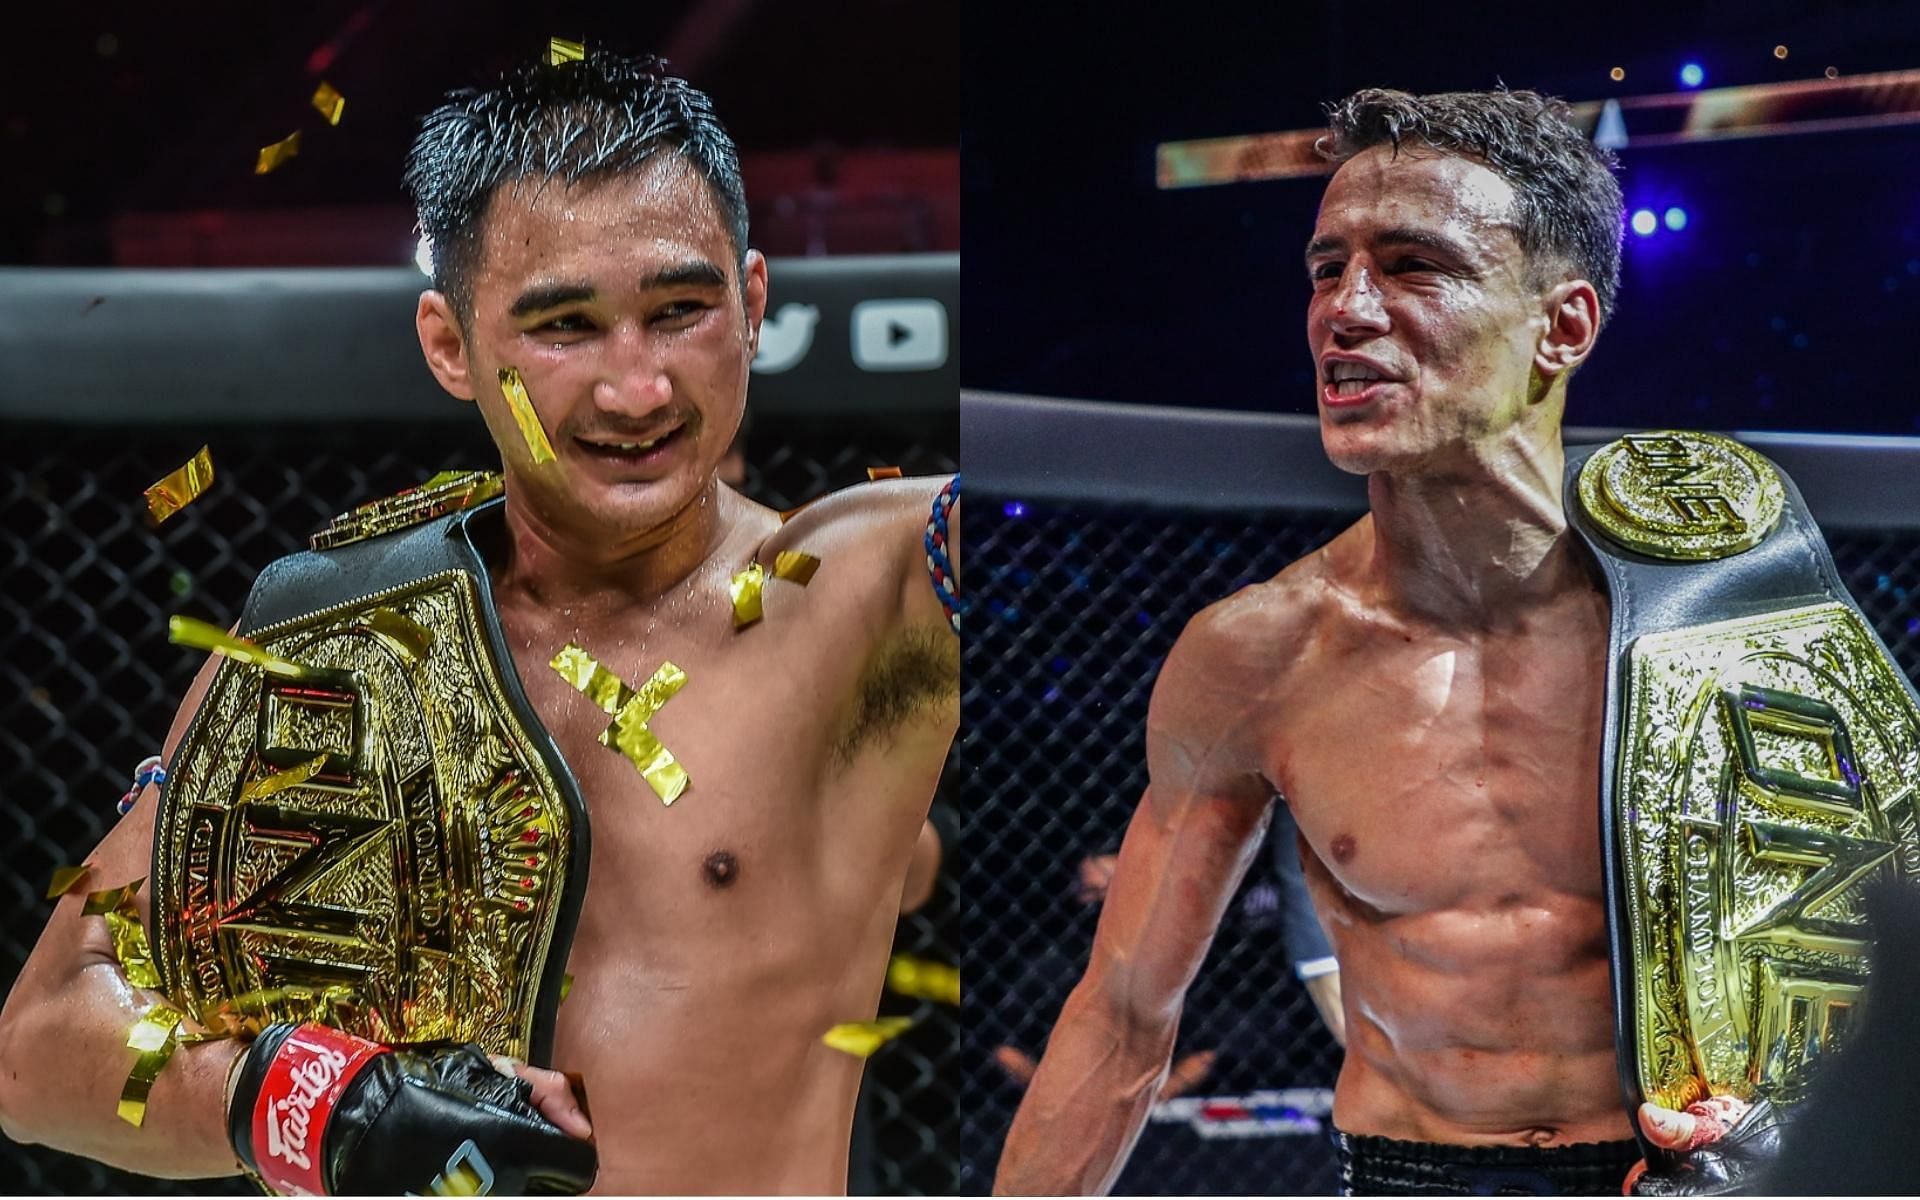 Petchmorakot Petchyindee (left) and Joseph Lasiri (right) both walk out as champion after ONE 157. [Images courtesy of ONE Championship]